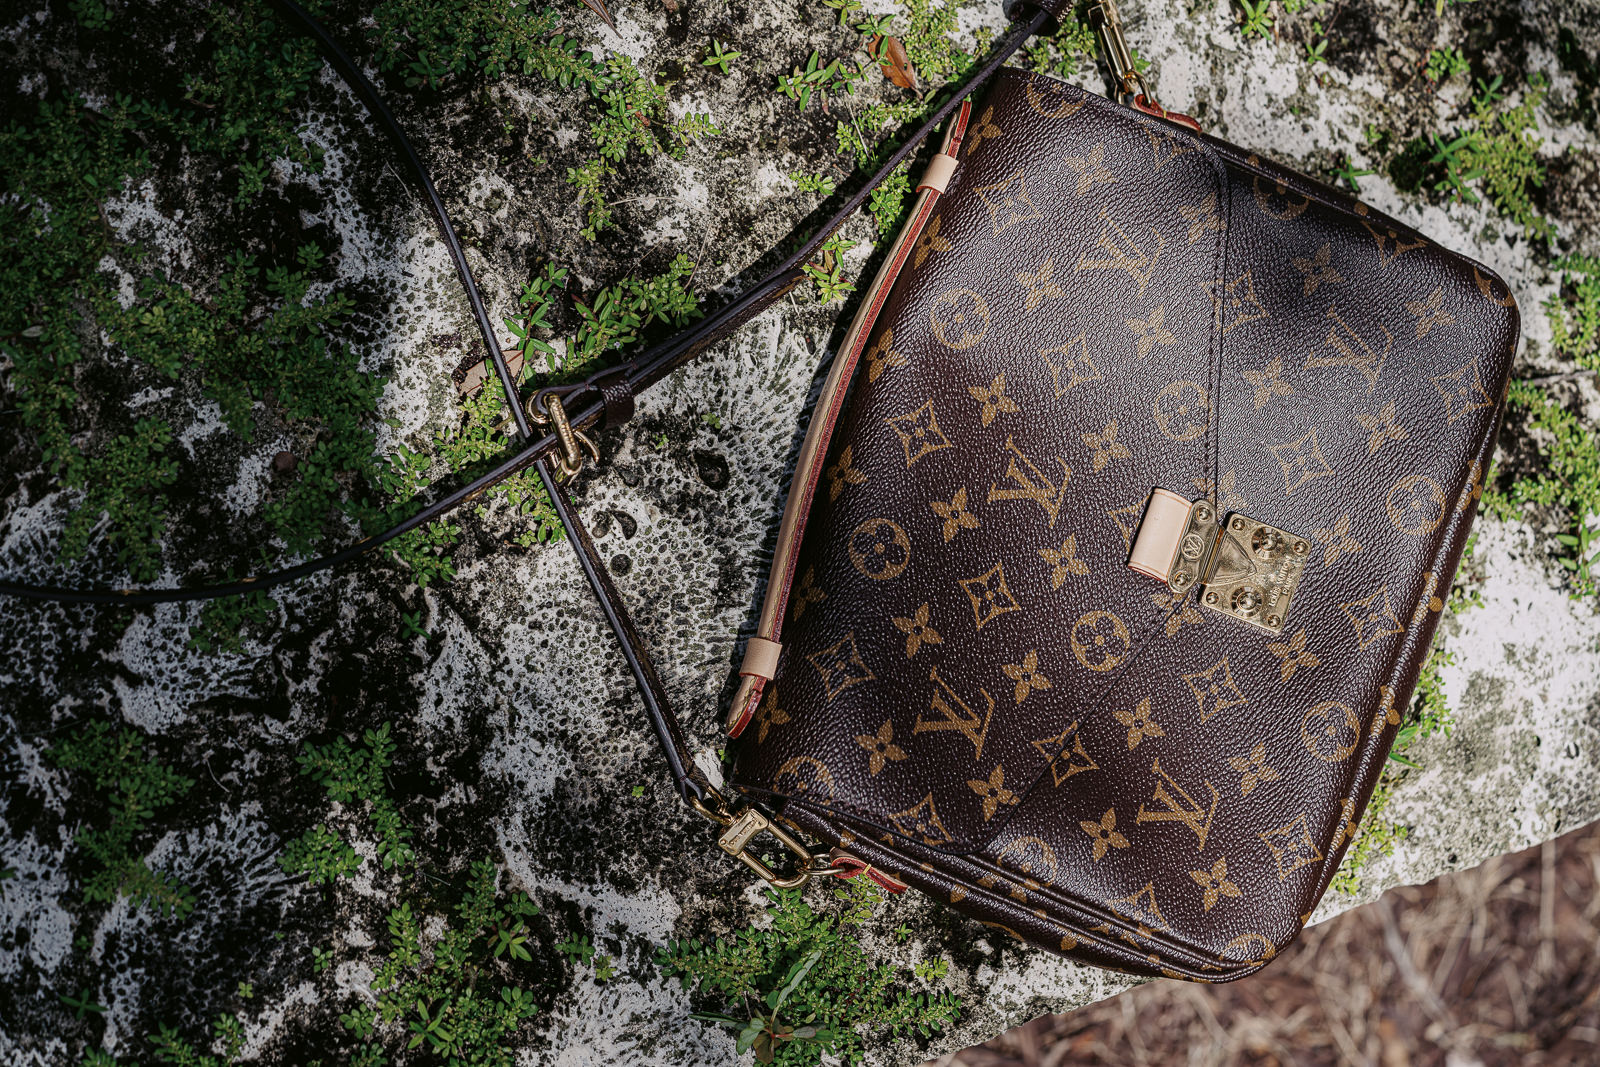 Introducing the New Louis Vuitton Pochette Bag That Is Everywhere -  PurseBlog